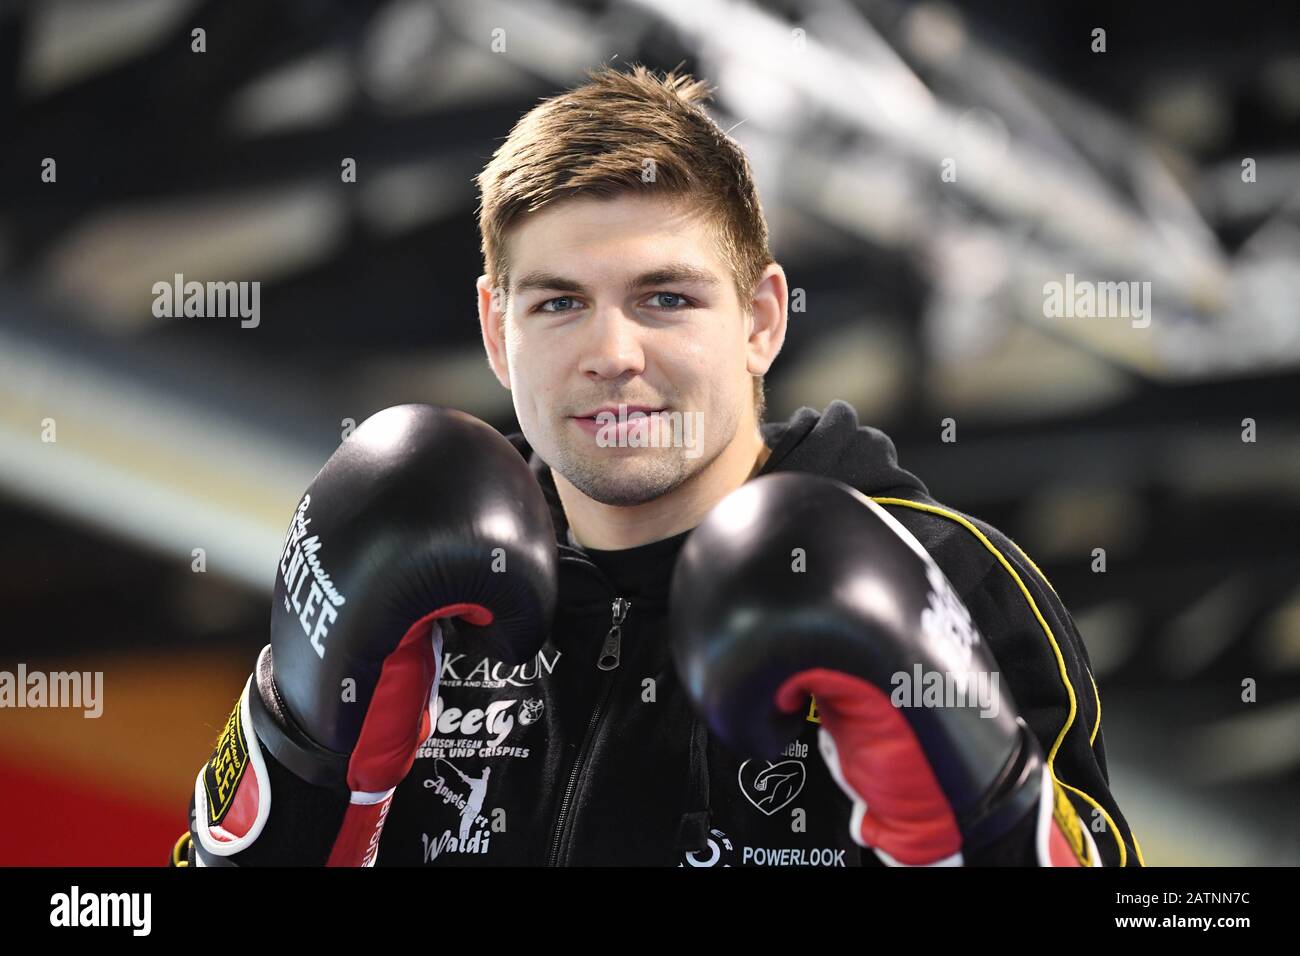 Eggenstein Leopoldshafen, Germany. 04th Feb, 2020. The German professional  boxer Vincent Feigenbutz, taken during a press training at the Eggenstein  boxing club. Feigenbutz will fight for the super middleweight belt of the